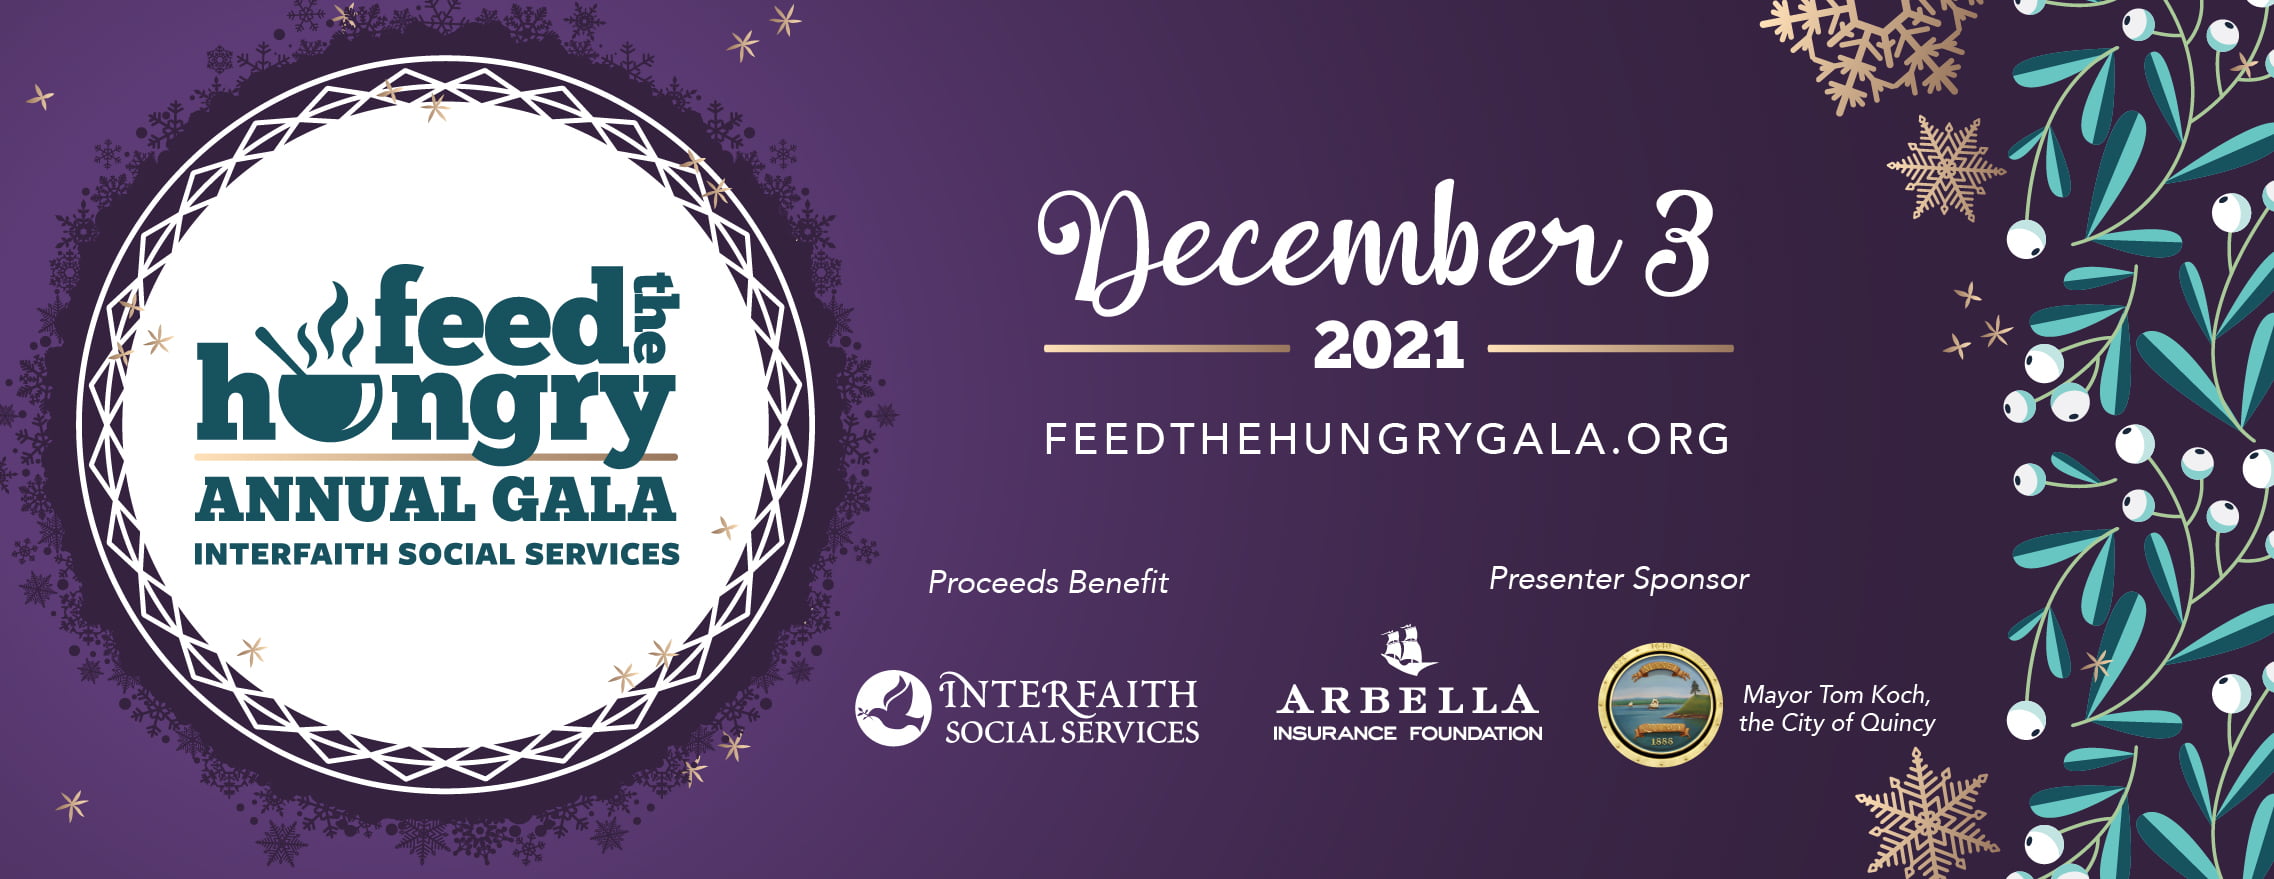 Feed the Hungry Gala 2021